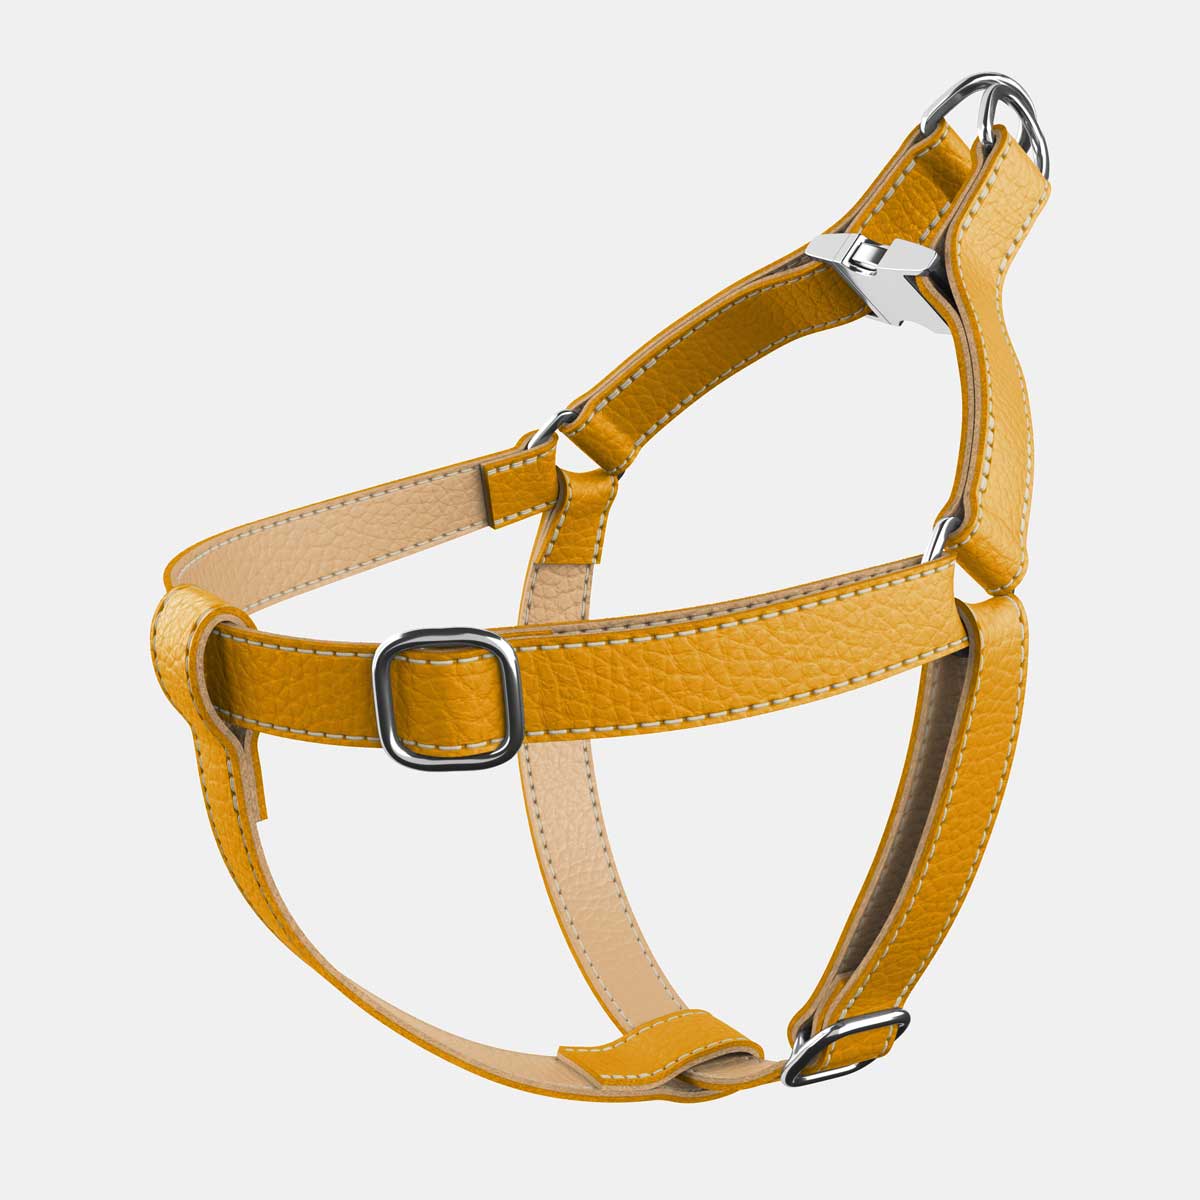 Leather Dog Harness - Yellow and Beige